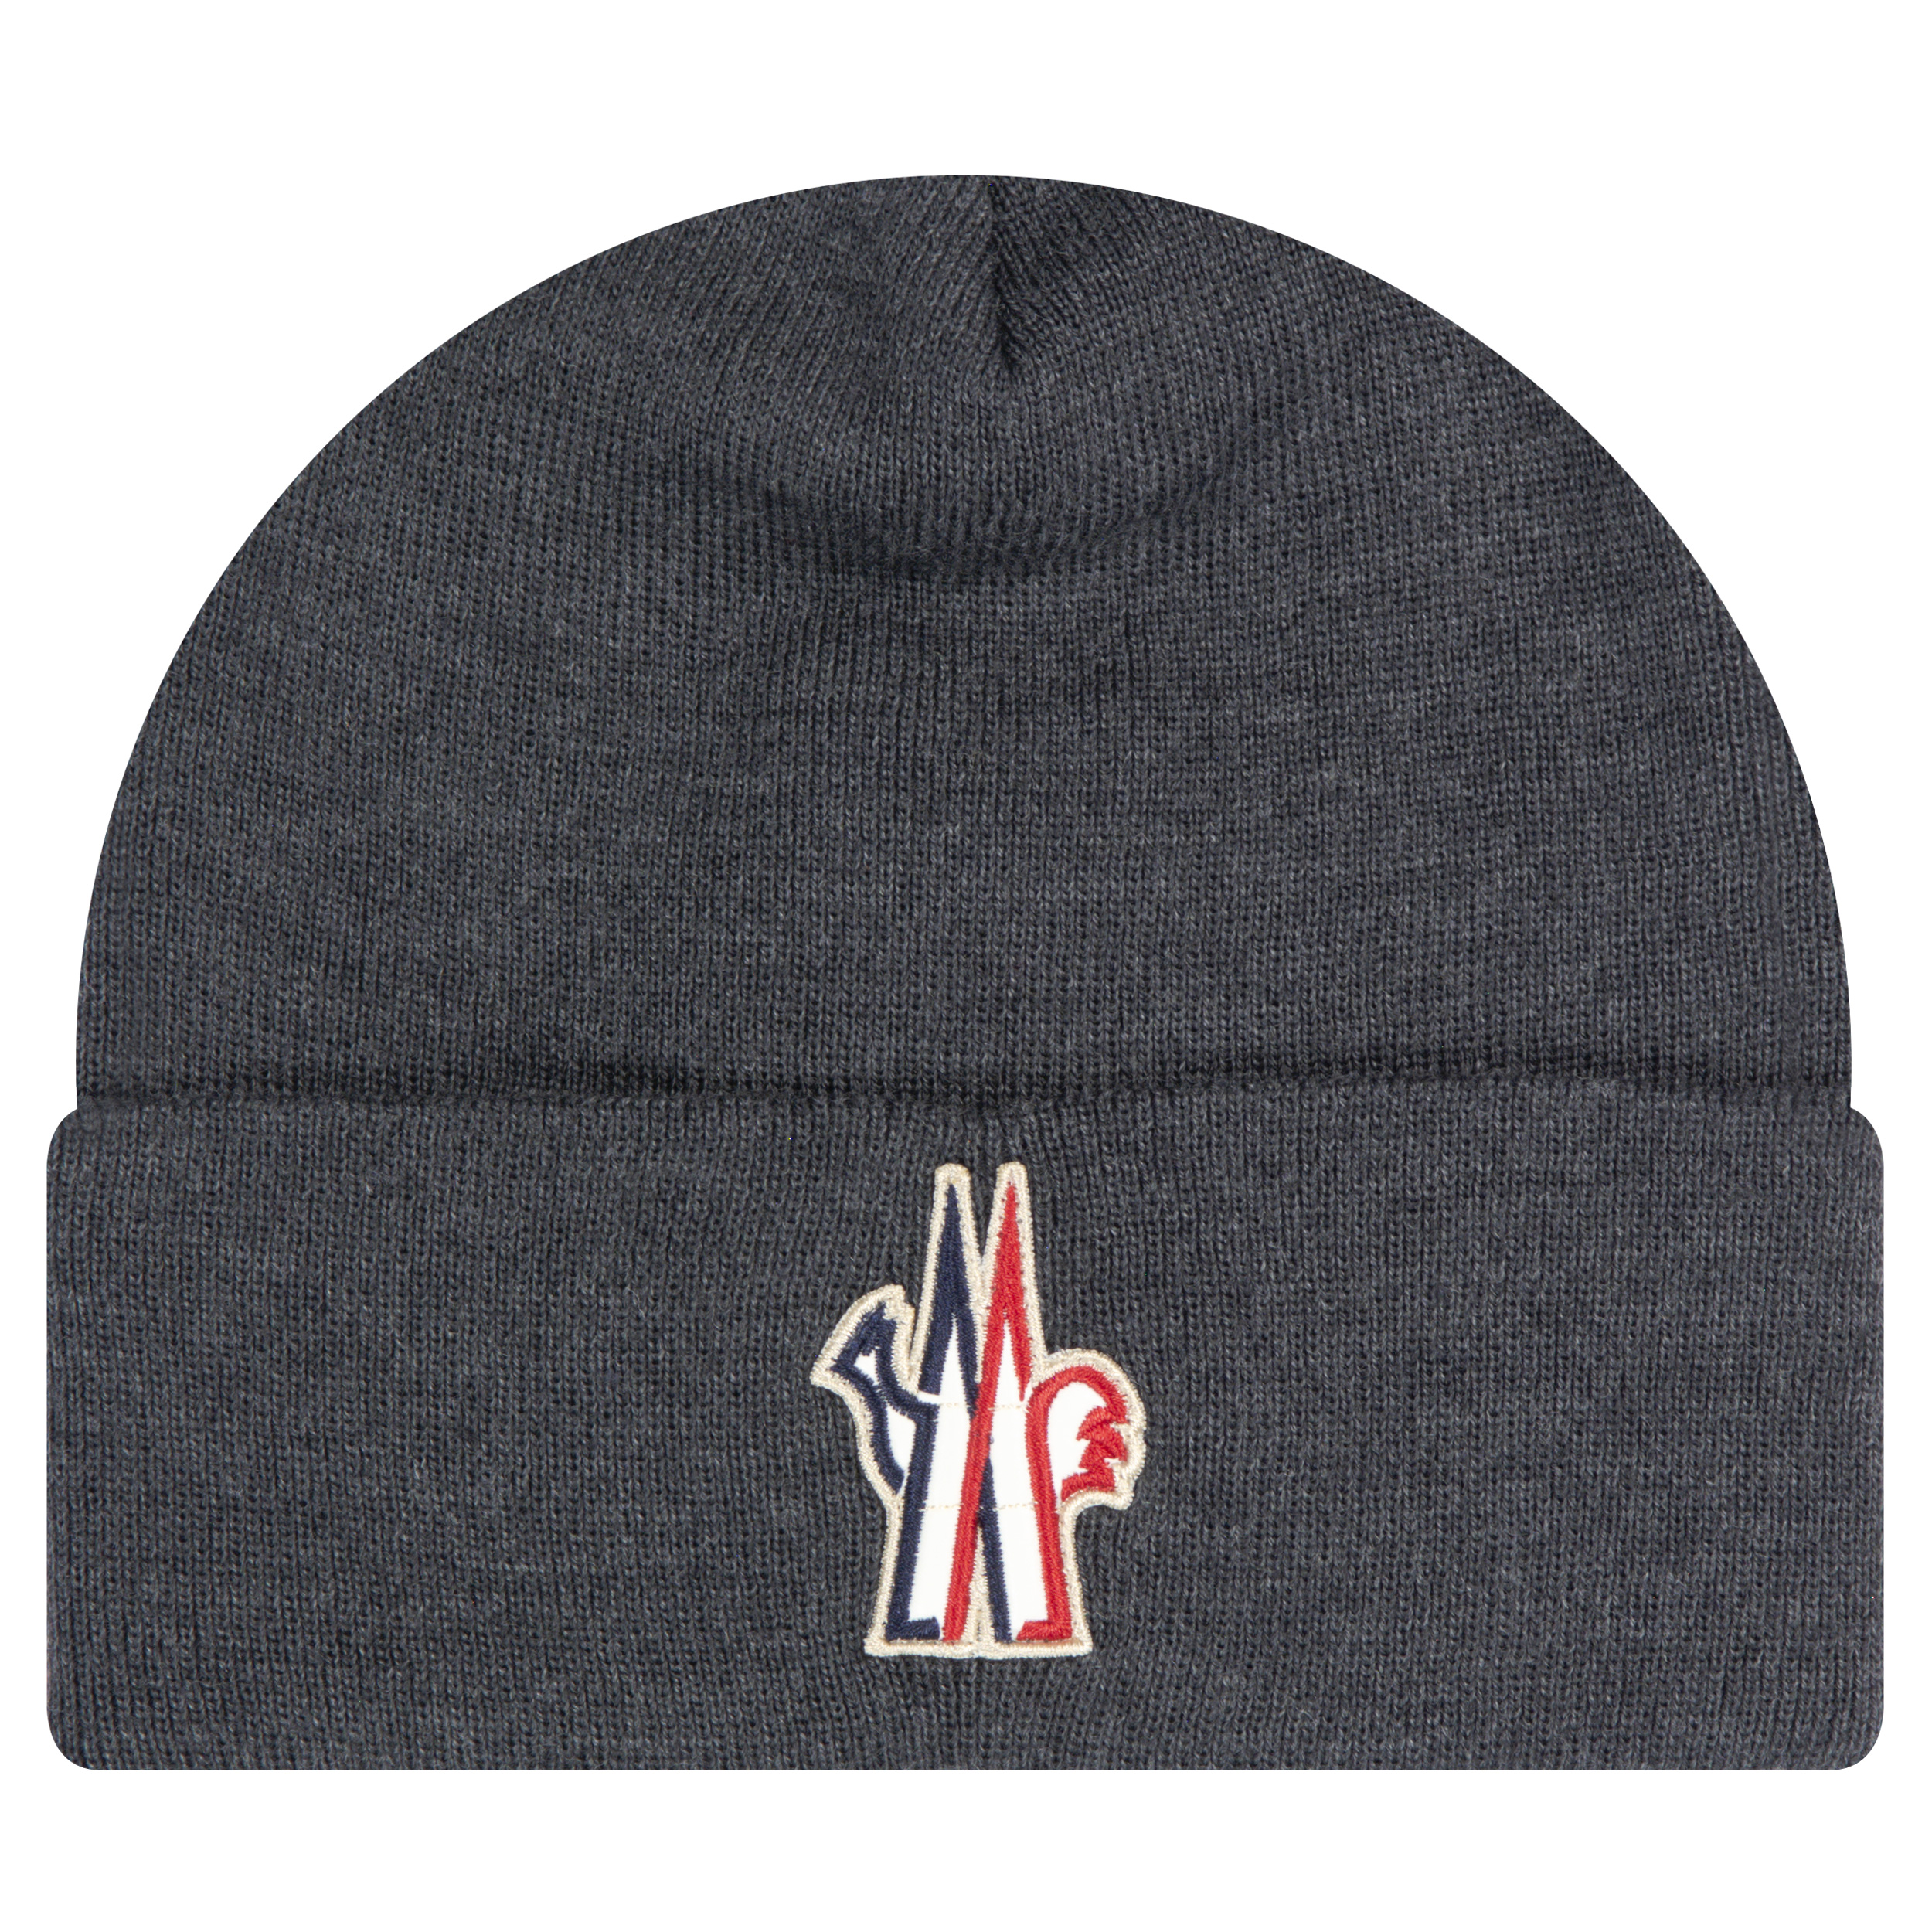 Moncler Grenoble ’Logo-Patch’ Knitted Beanie Charcoal Grey